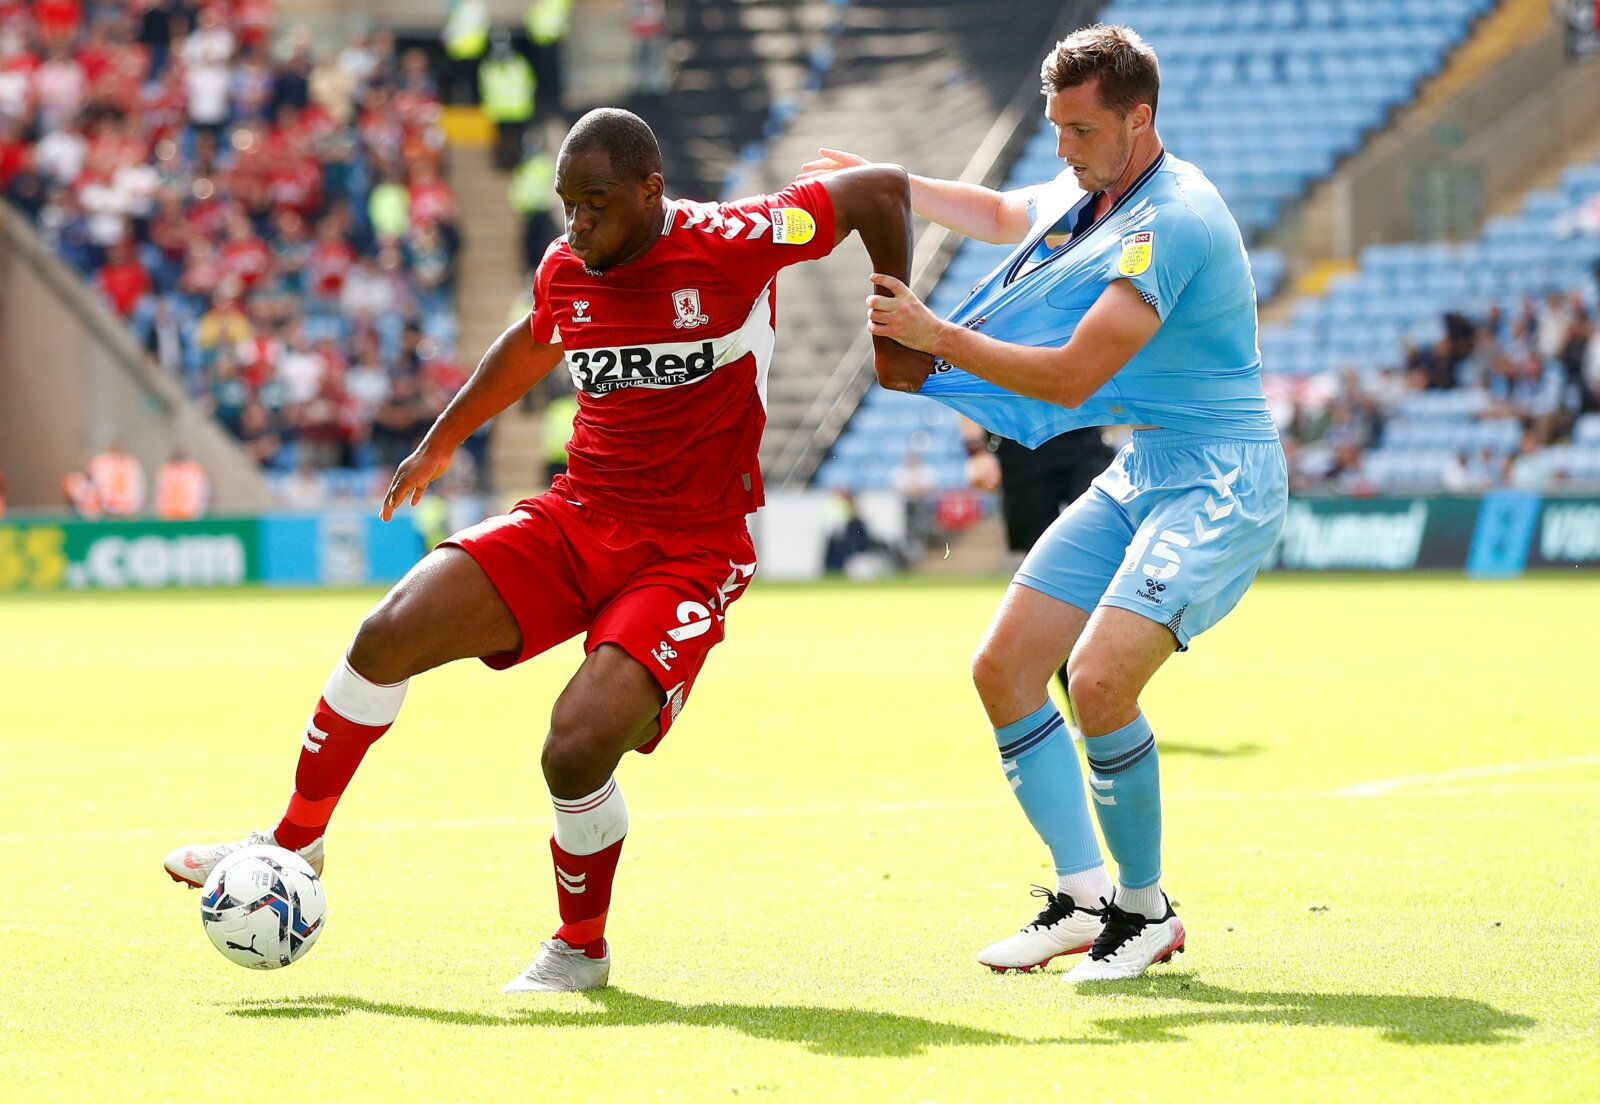 Soccer Football - Championship - Coventry City v Middlesbrough - Coventry Building Society Arena, Coventry, Britain - September 11, 2021  Middlesbrough's Uche Ikpeazu in action with Coventry City's Dominic Hyam   Action Images/Jason Cairnduff  EDITORIAL USE ONLY. No use with unauthorized audio, video, data, fixture lists, club/league logos or "live" services. Online in-match use limited to 75 images, no video emulation. No use in betting, games or single club/league/player publications.  Please 